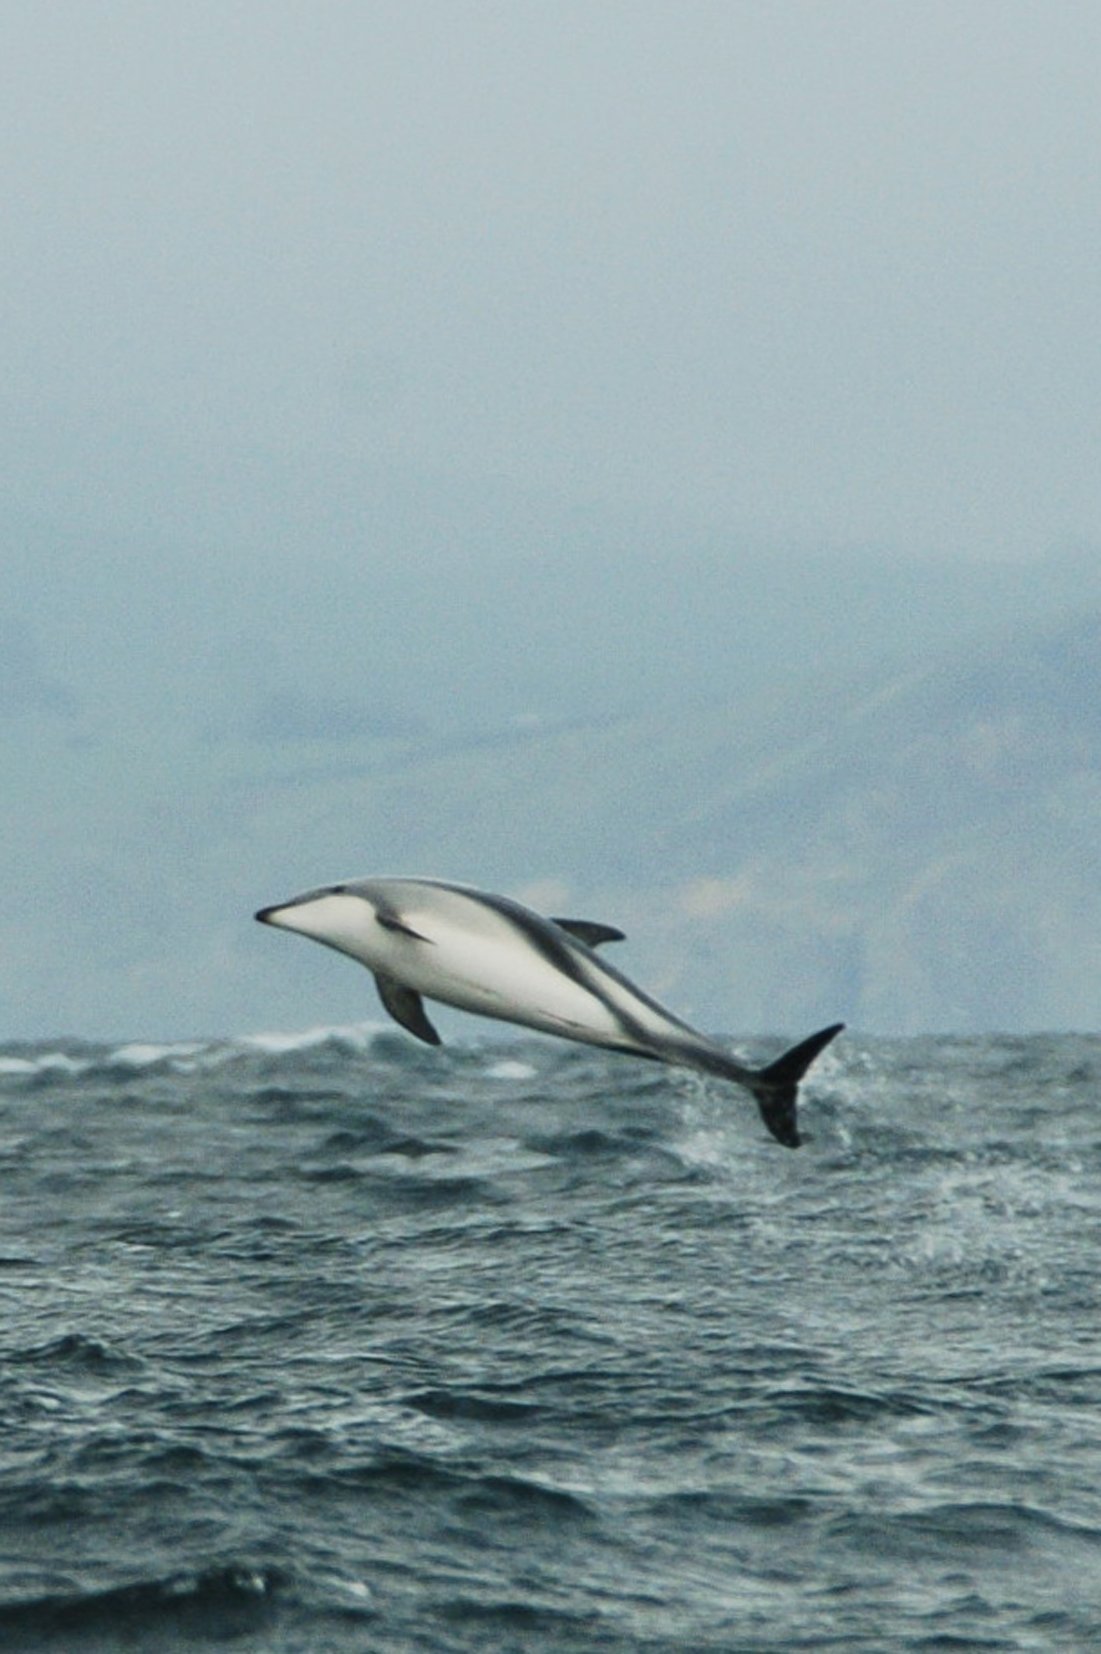 A Hector’s dolphin leaps from the water. Photo: Stephen Jaquiery